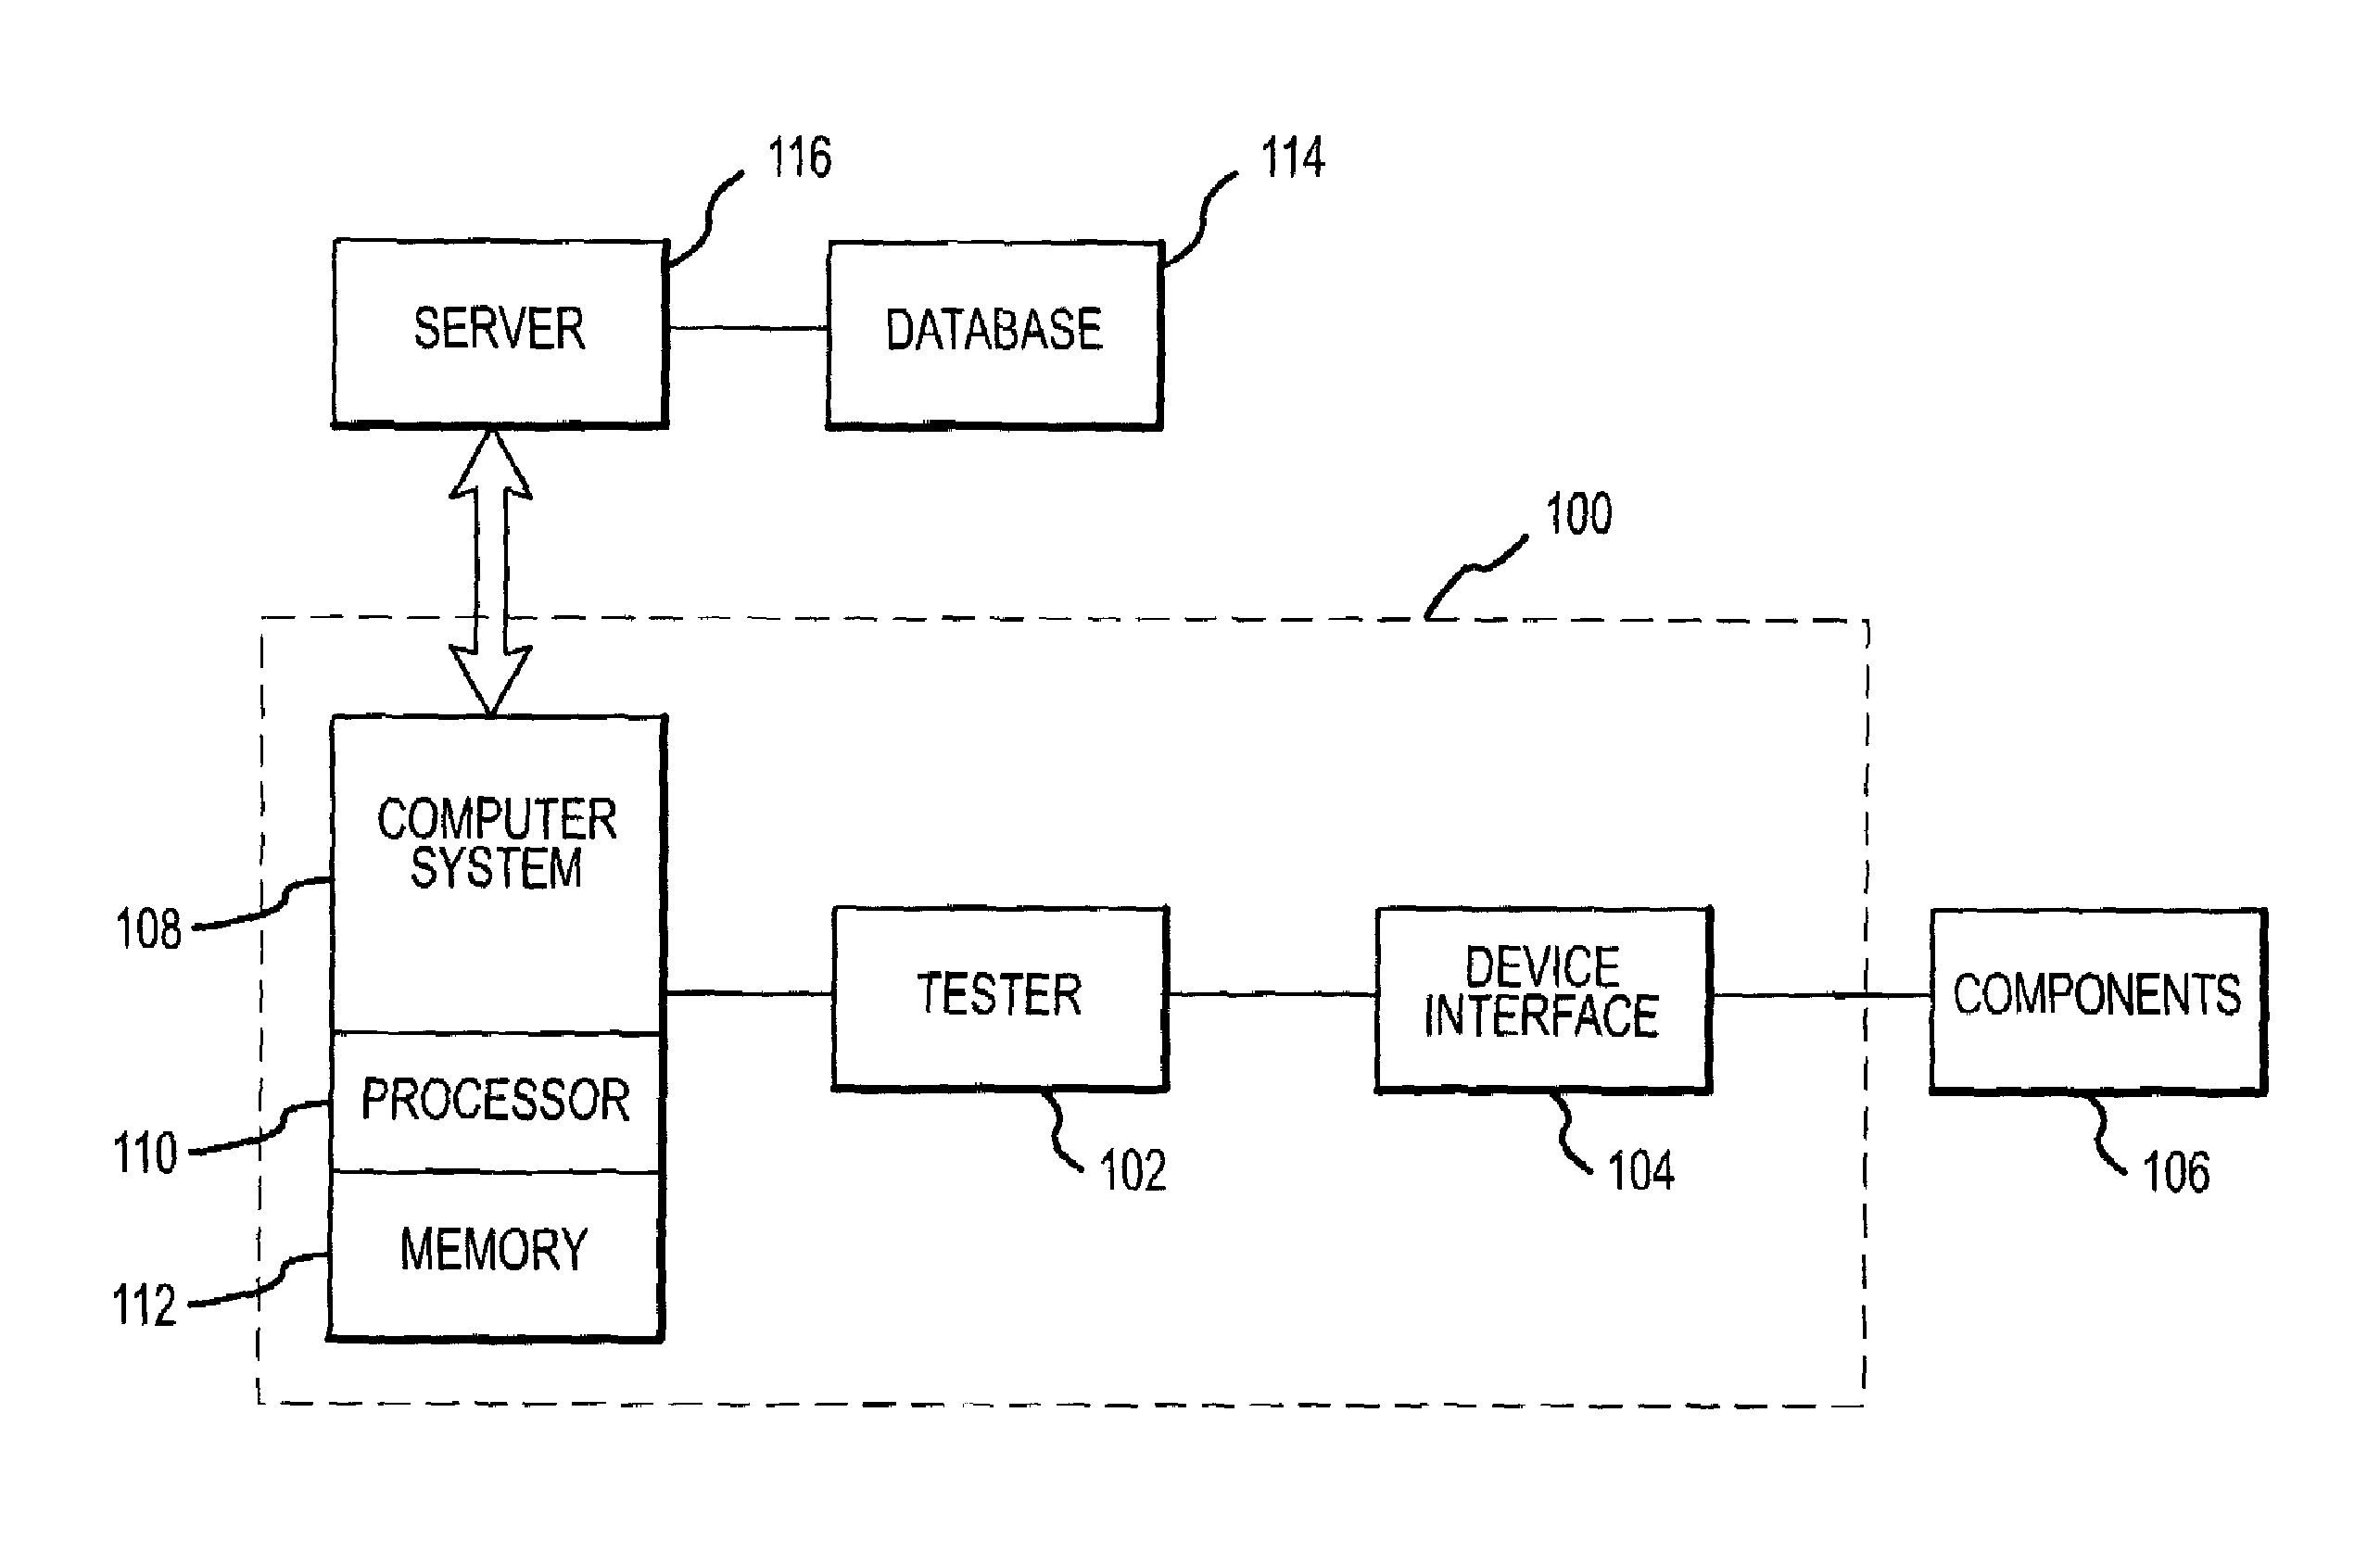 Methods and Apparatus for Data Analysis